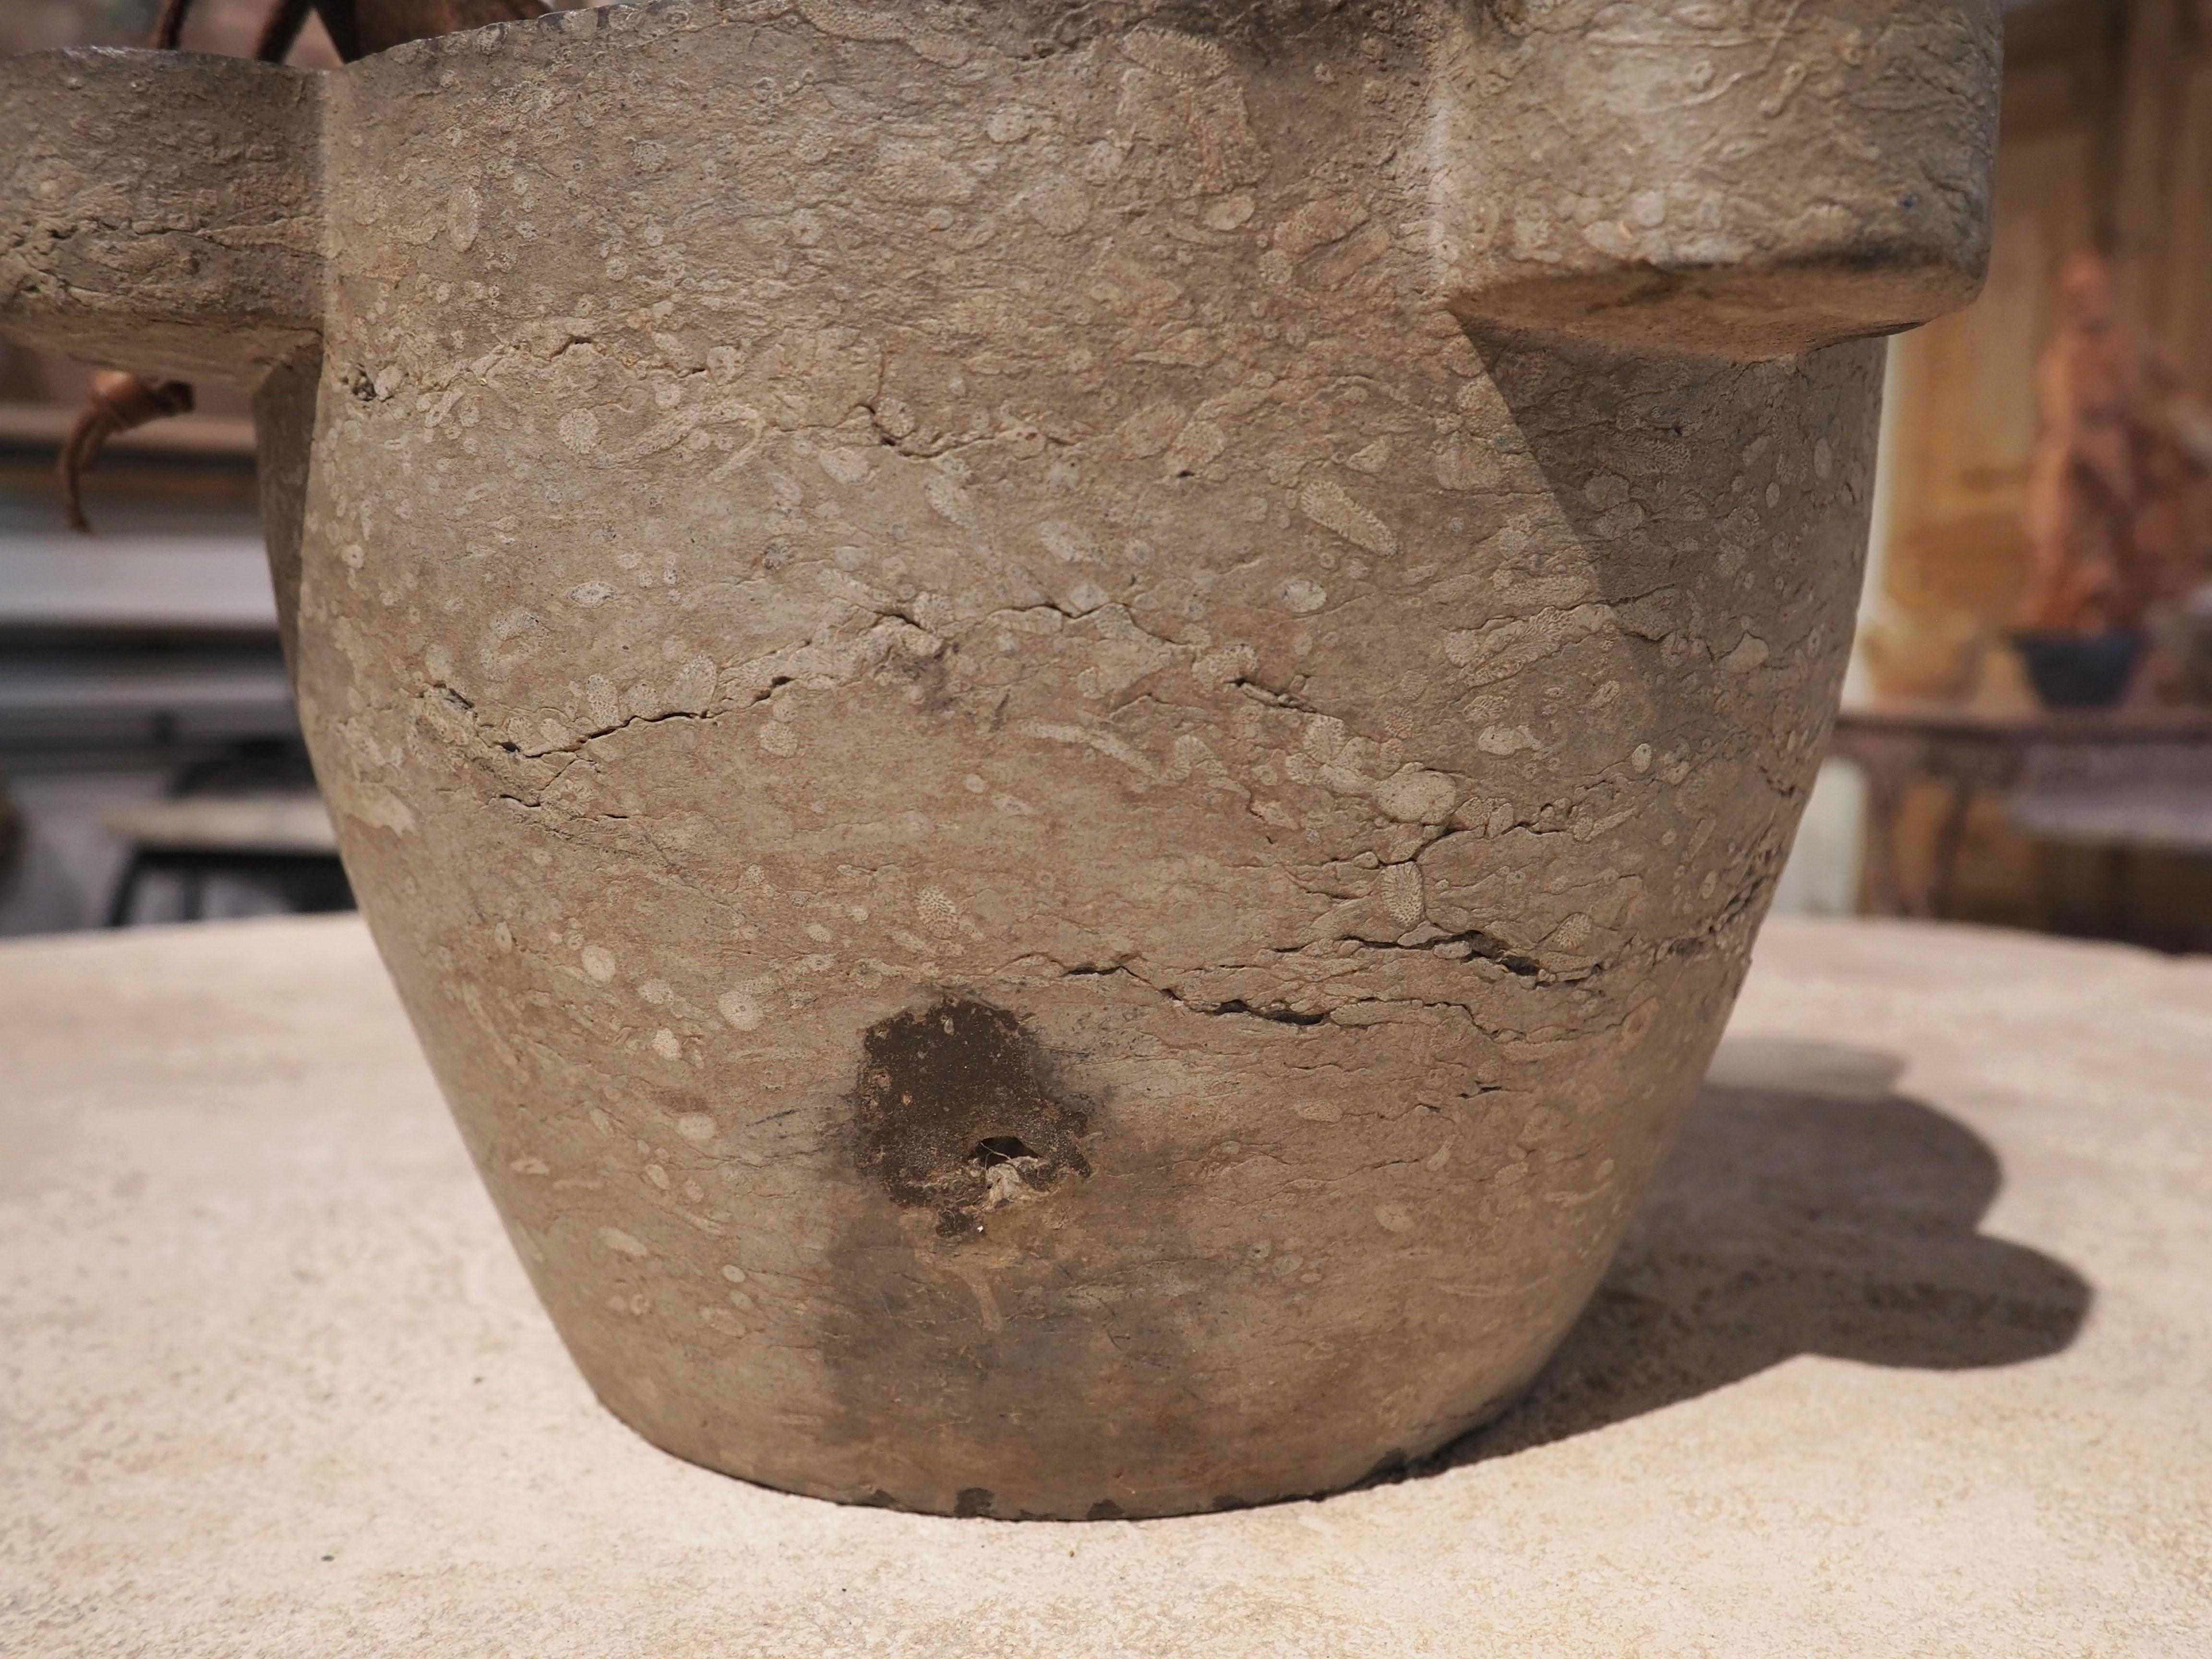 During antiquity, mortars and pestles were used to grind up herbs for cooking or by pharmacists to make medicinal powders. They are typically constructed from a hardened substance, such as this 19th century French marble mortar. The light gray stone